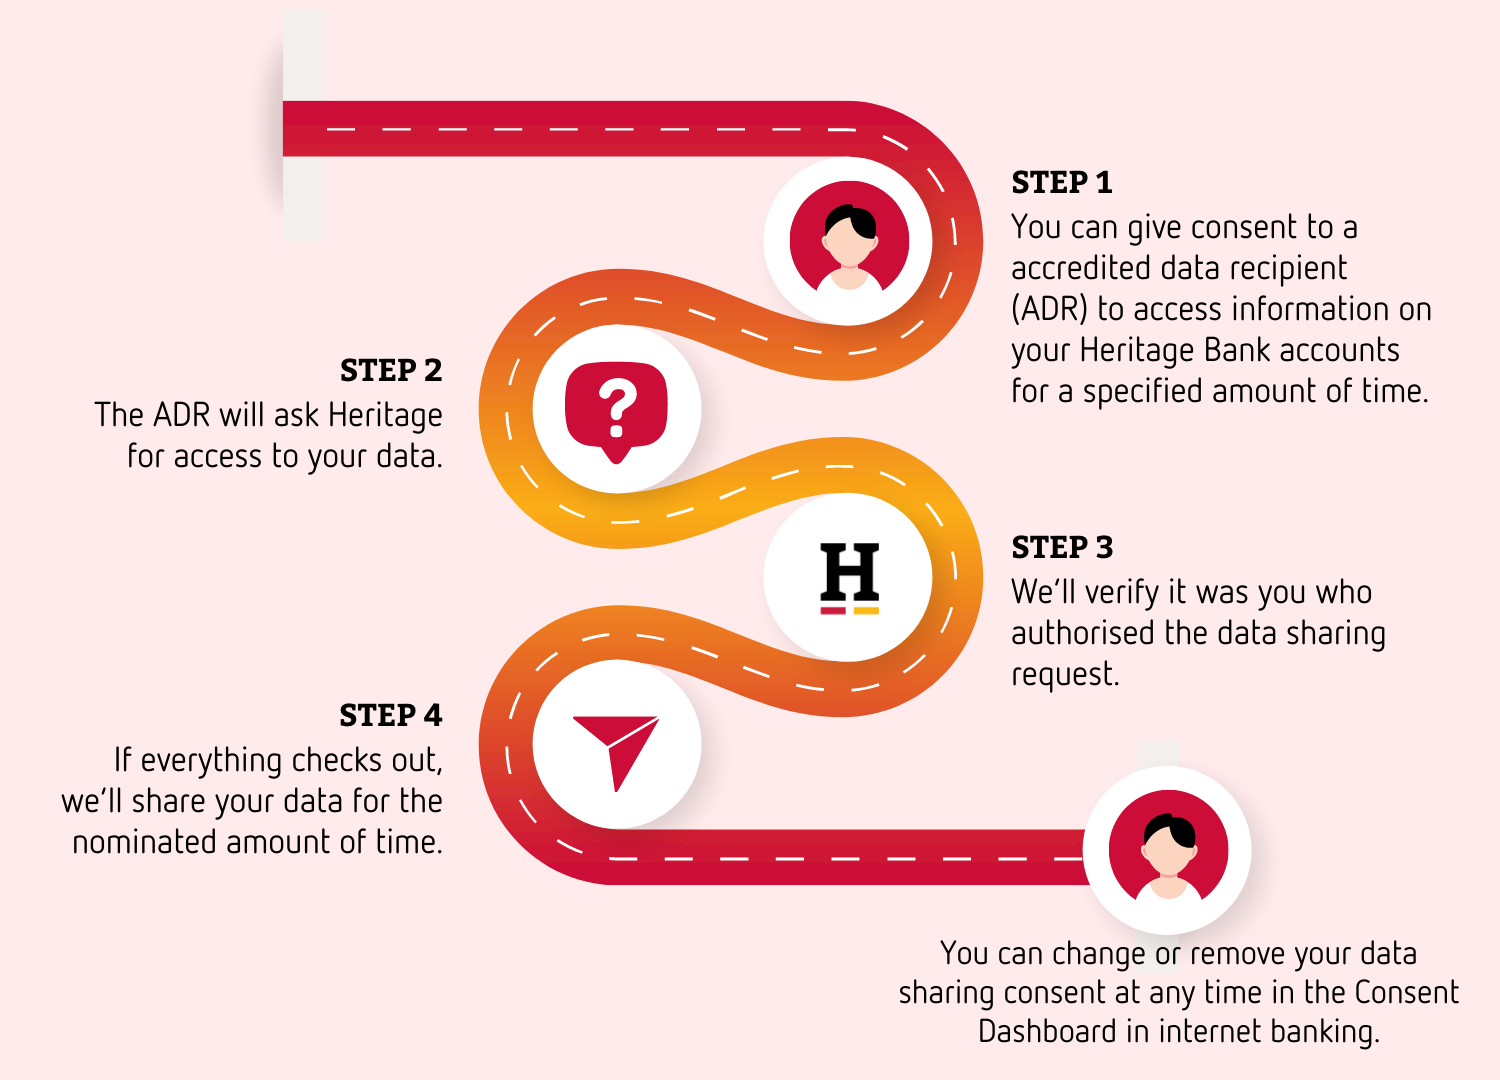 https://resources.heritage.com.au/-/media/m/tools/infographics/saving/how-open-banking-works---heritage-bank.png?cx=0.5&cy=0.5&cw=1500&ch=1080&hash=877D95E34A6A0291CA89A992C7780BDCB3EB4A59